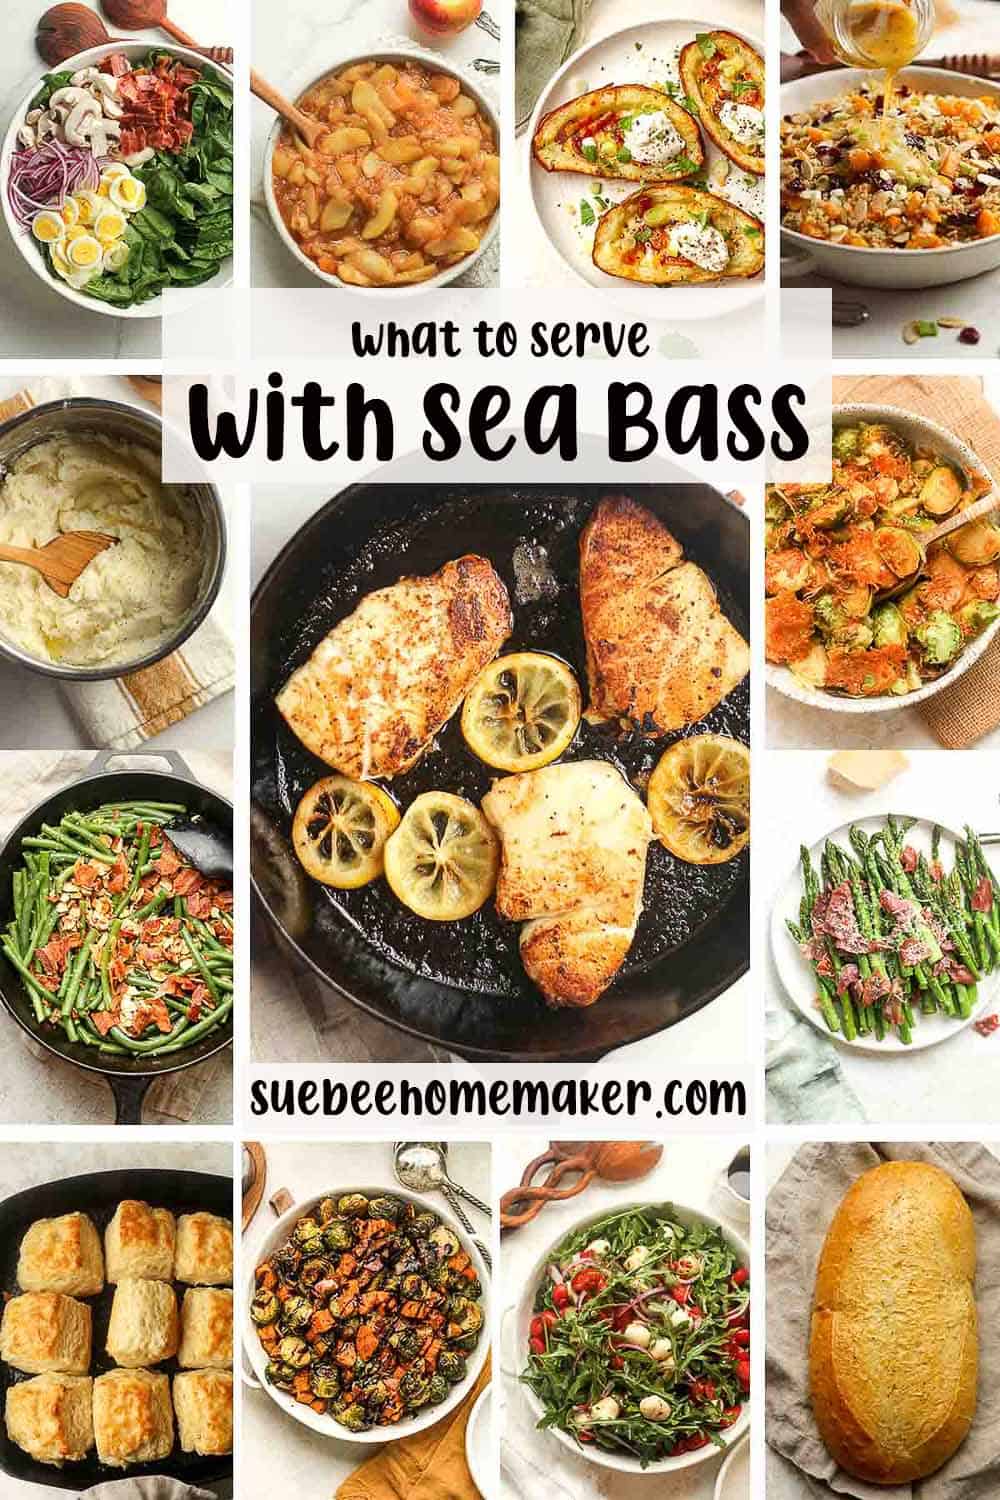 A collage of side dishes to pair with sea bass.